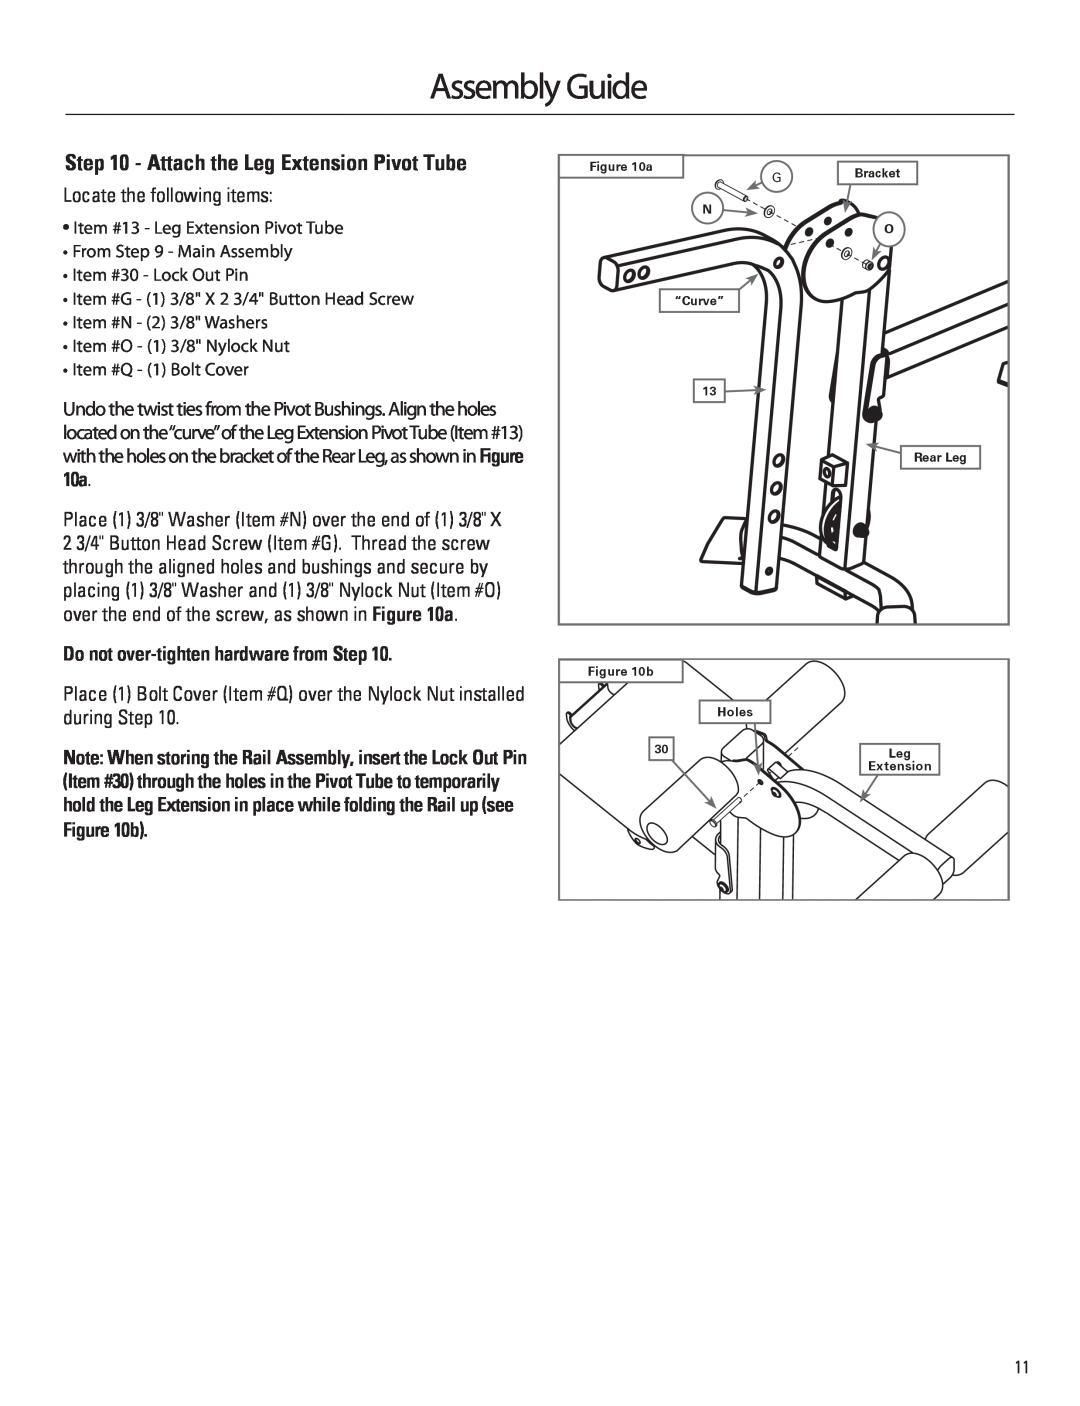 Bowflex 001-6961 manual Assembly Guide, Attach the Leg Extension Pivot Tube, Do not over-tighten hardware from Step 